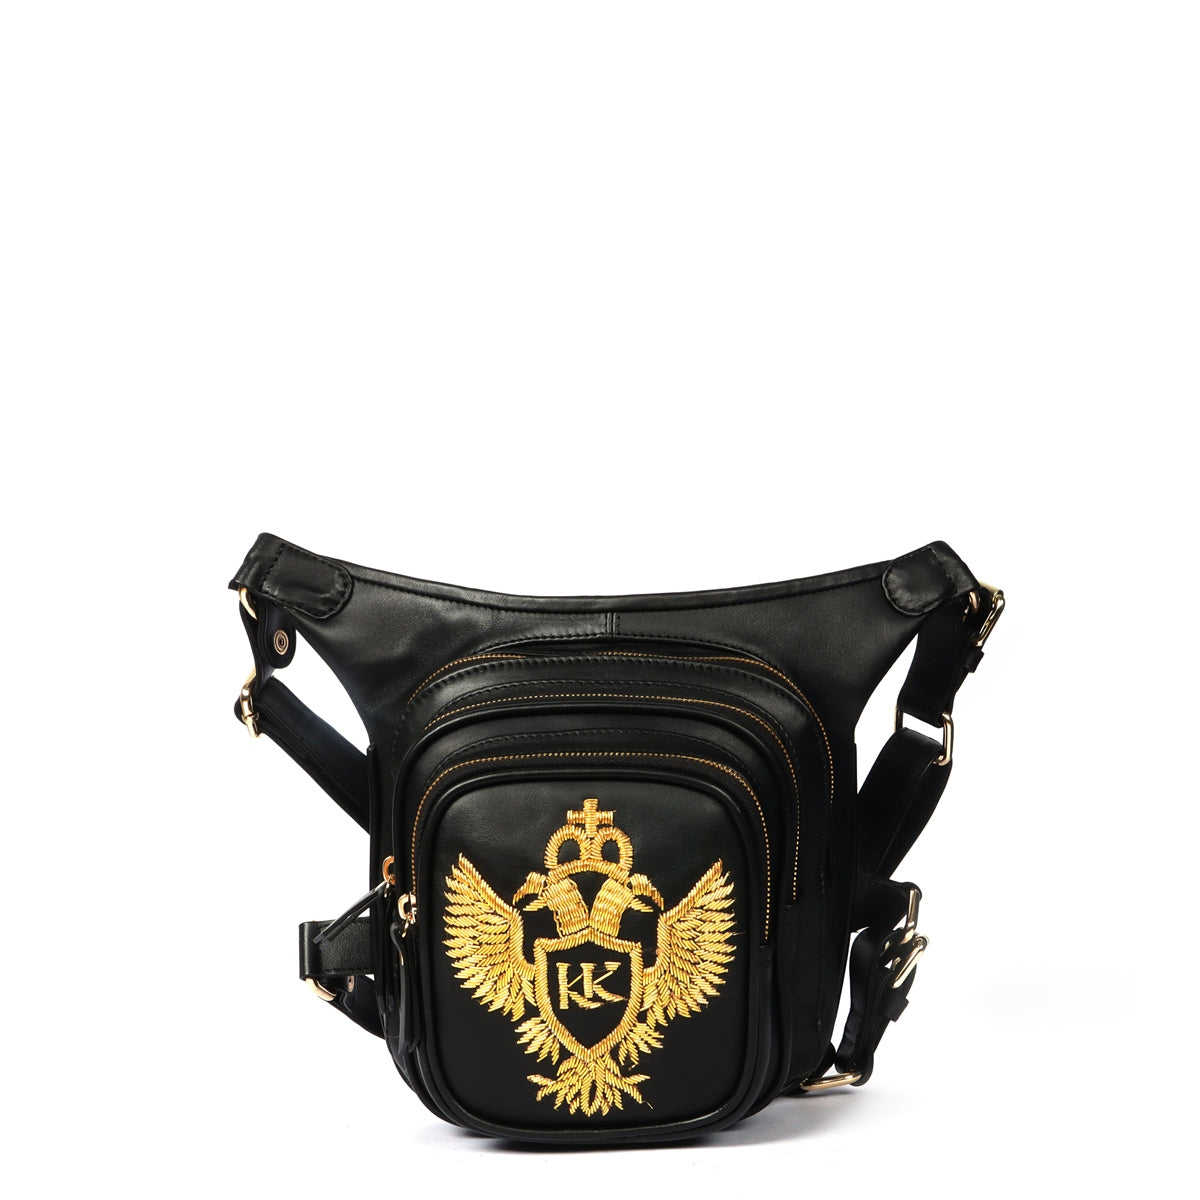 Bespoke Thigh Pouch Travel Bag with Golden Zardosi In Black Leather